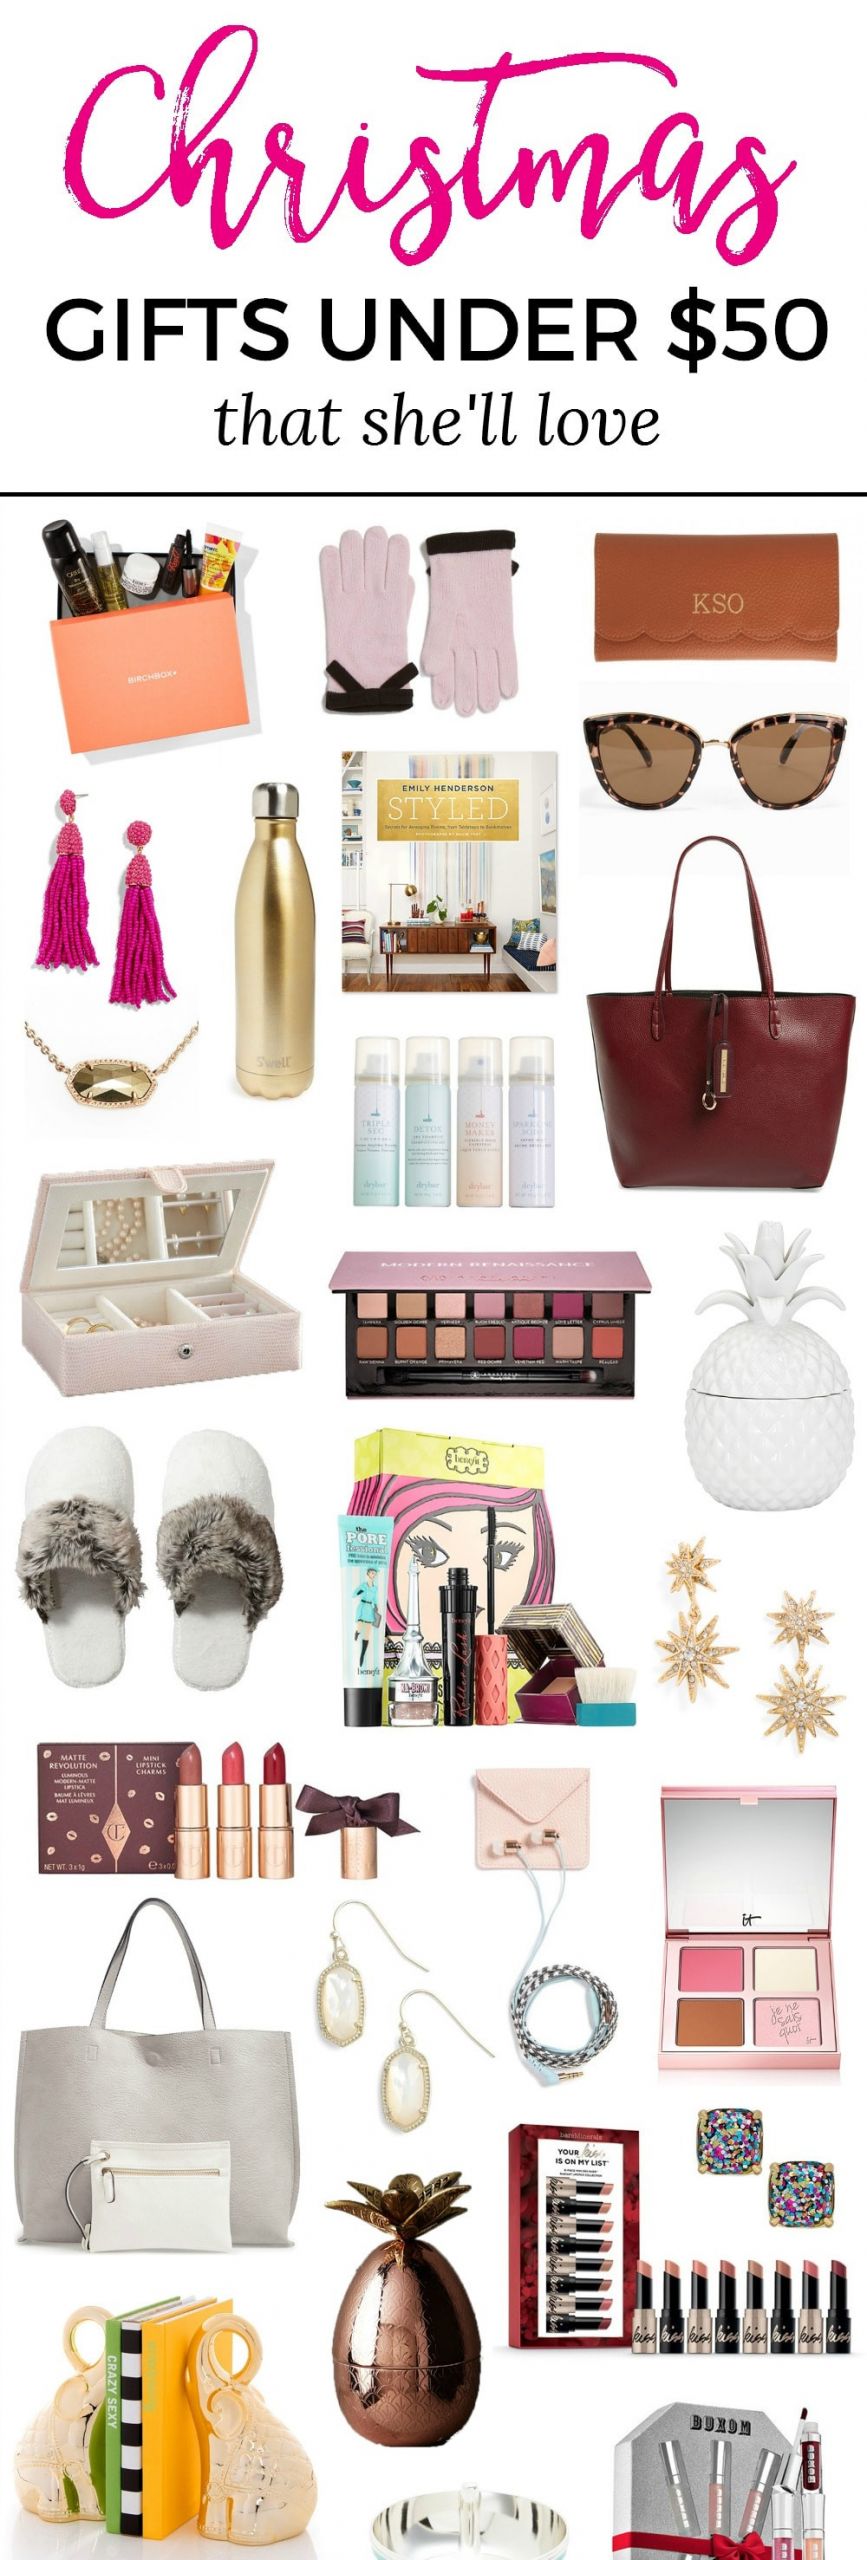 Womens Birthday Gift Ideas
 The Best Christmas Gift Ideas for Women under $50